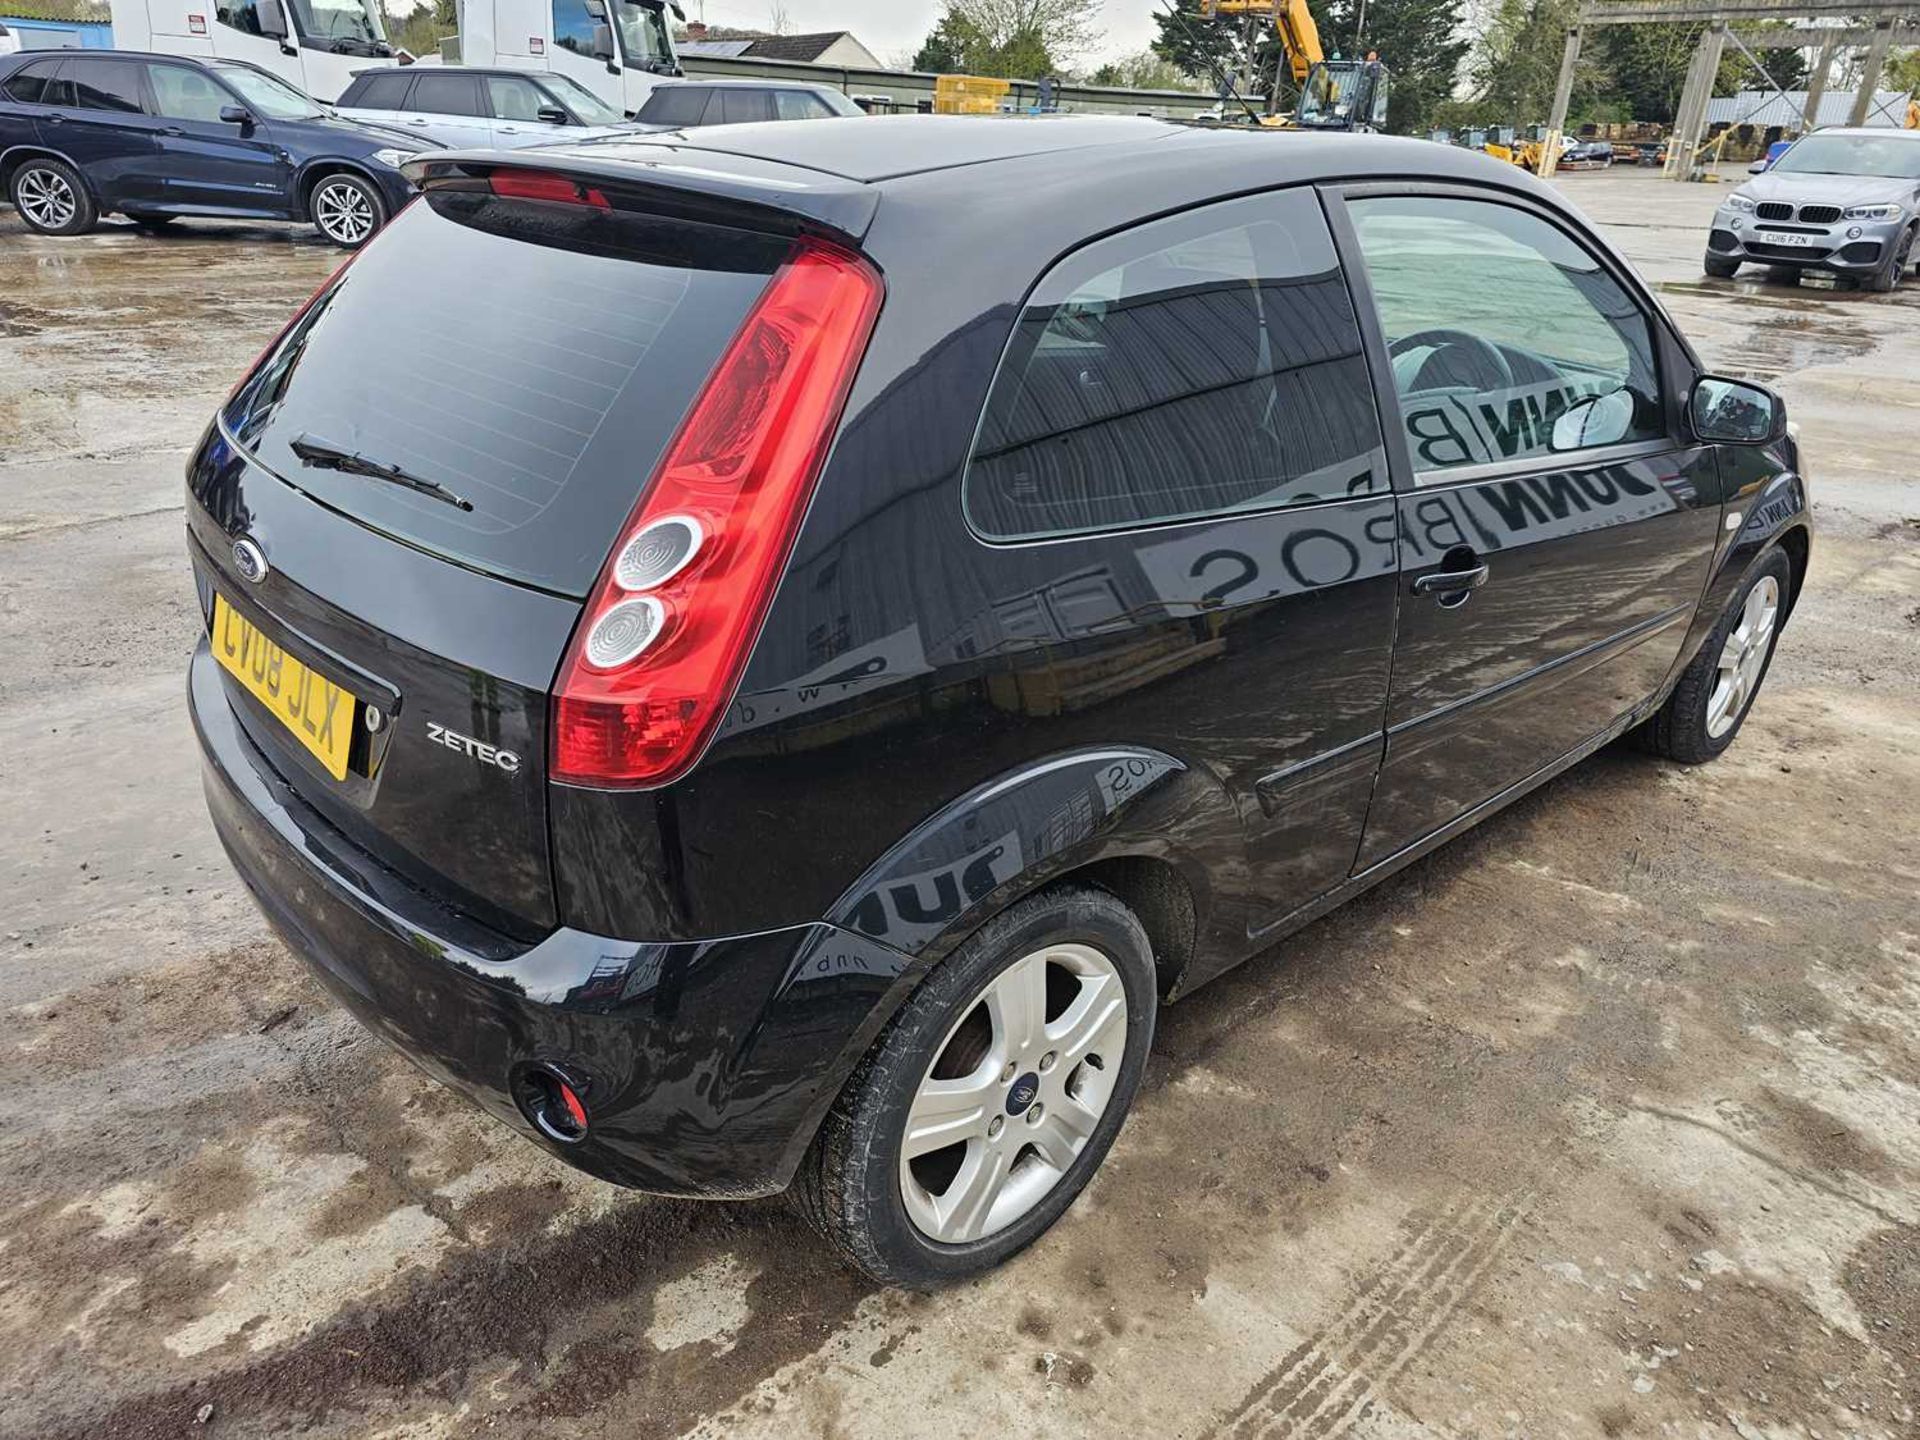 2008 Ford Fiesta Zetec Climate, 5 Speed, A/C (Reg. Docs. Available) - Image 4 of 26